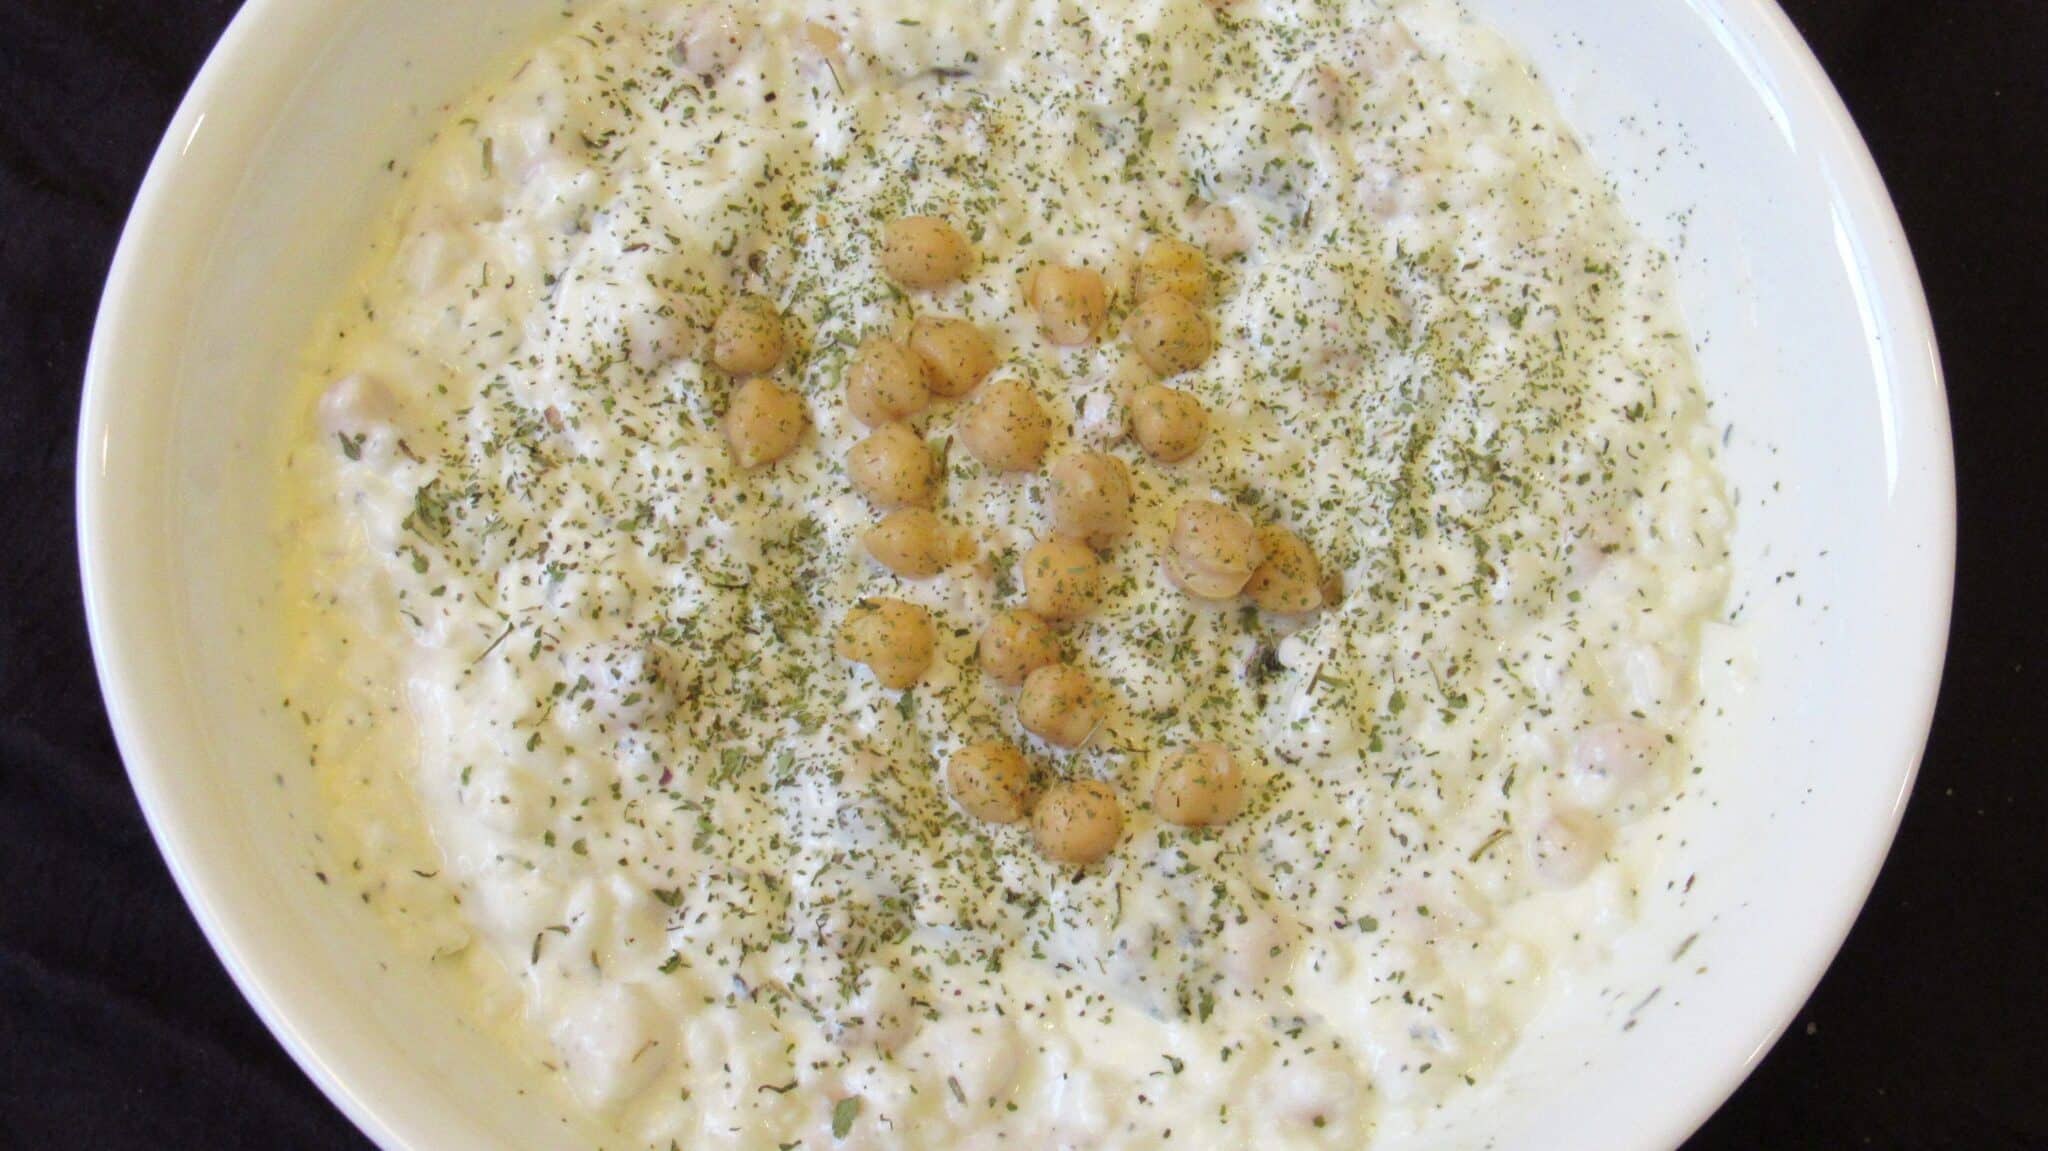 Chickpea salad with yogurt served in a white bowl.